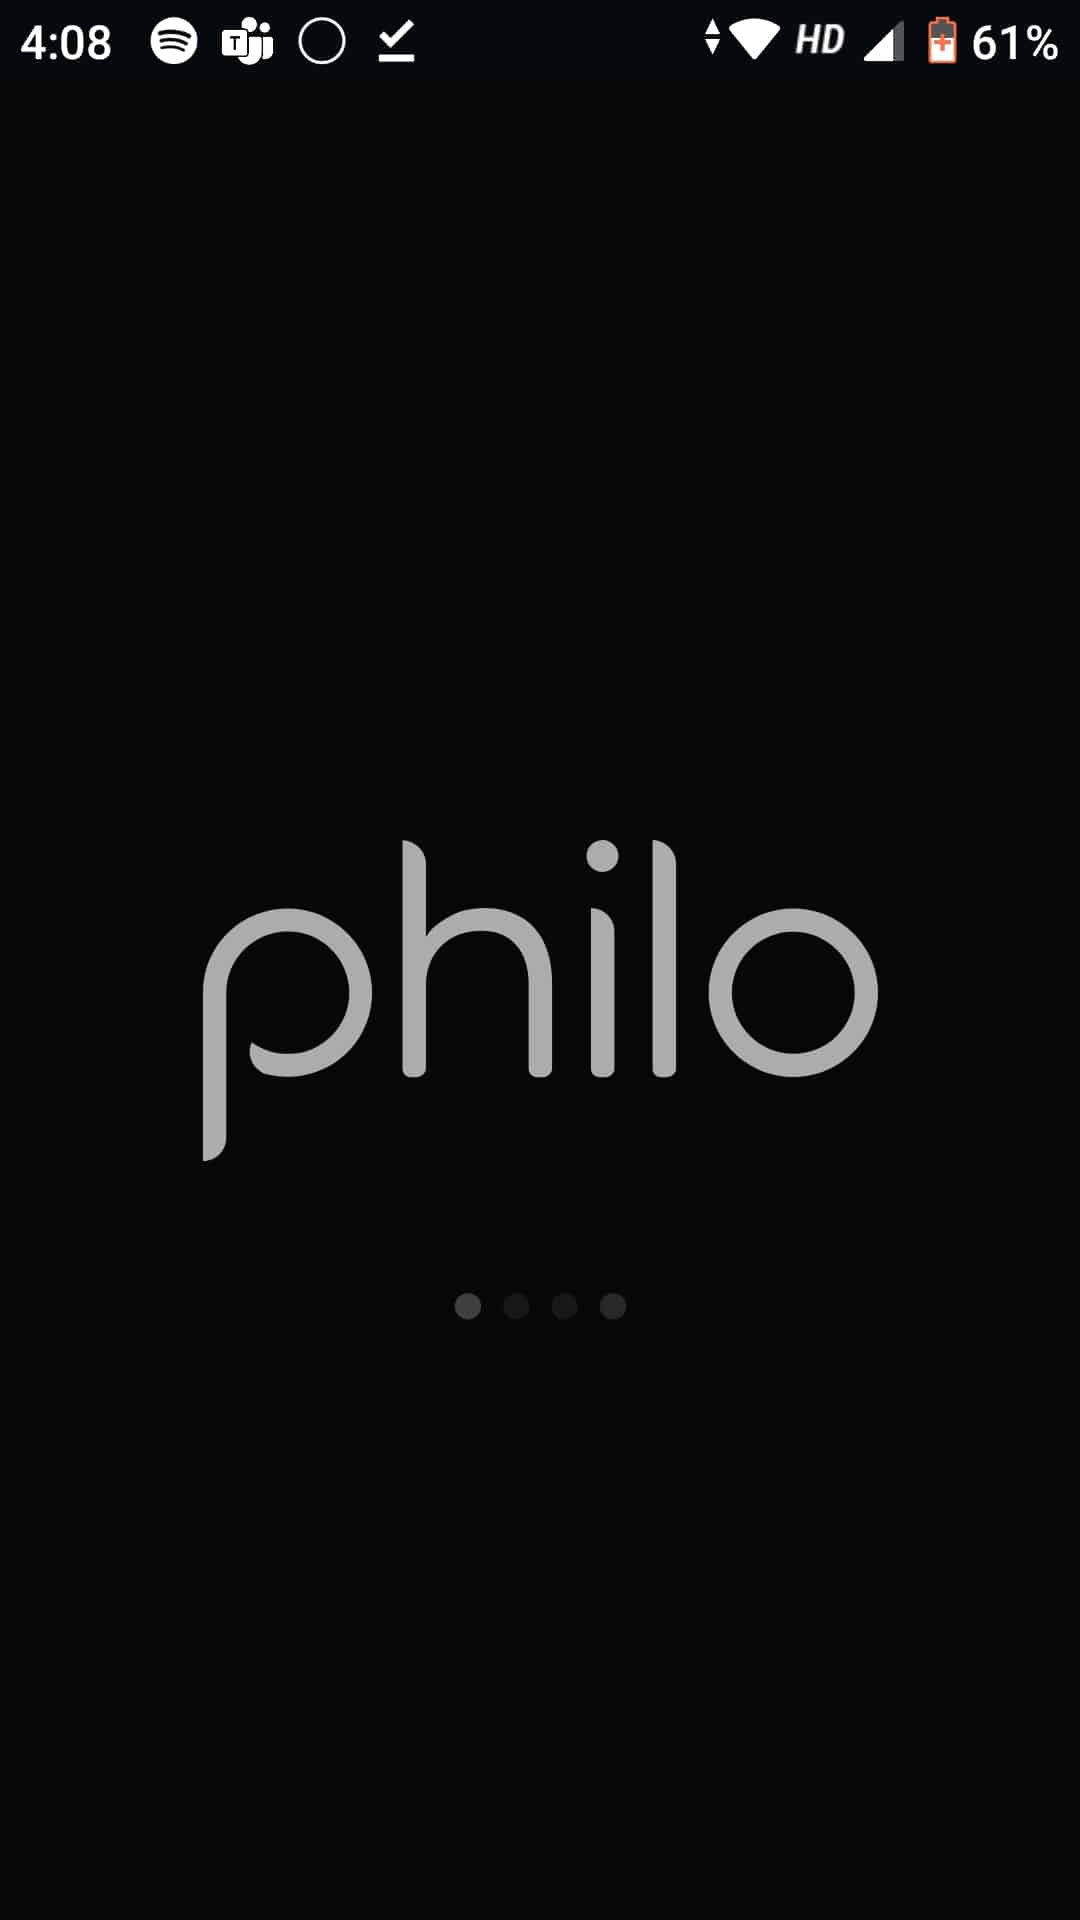 philo app interface on android mobile. How to Get Philo Free Trial